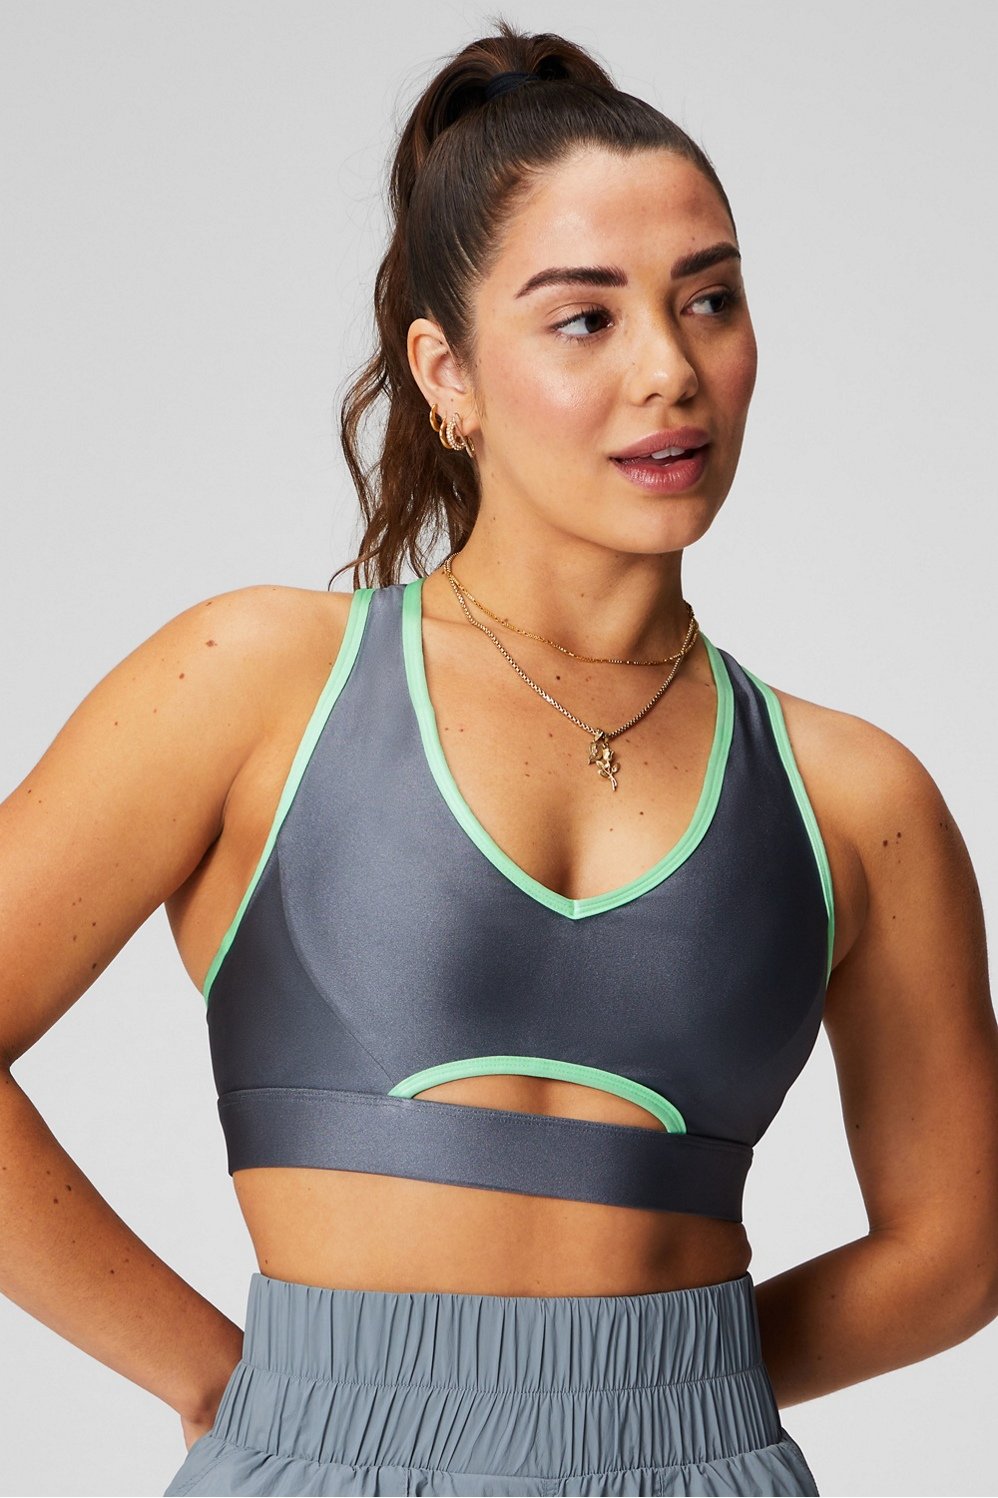 Good On You: How ethical is Fabletics?